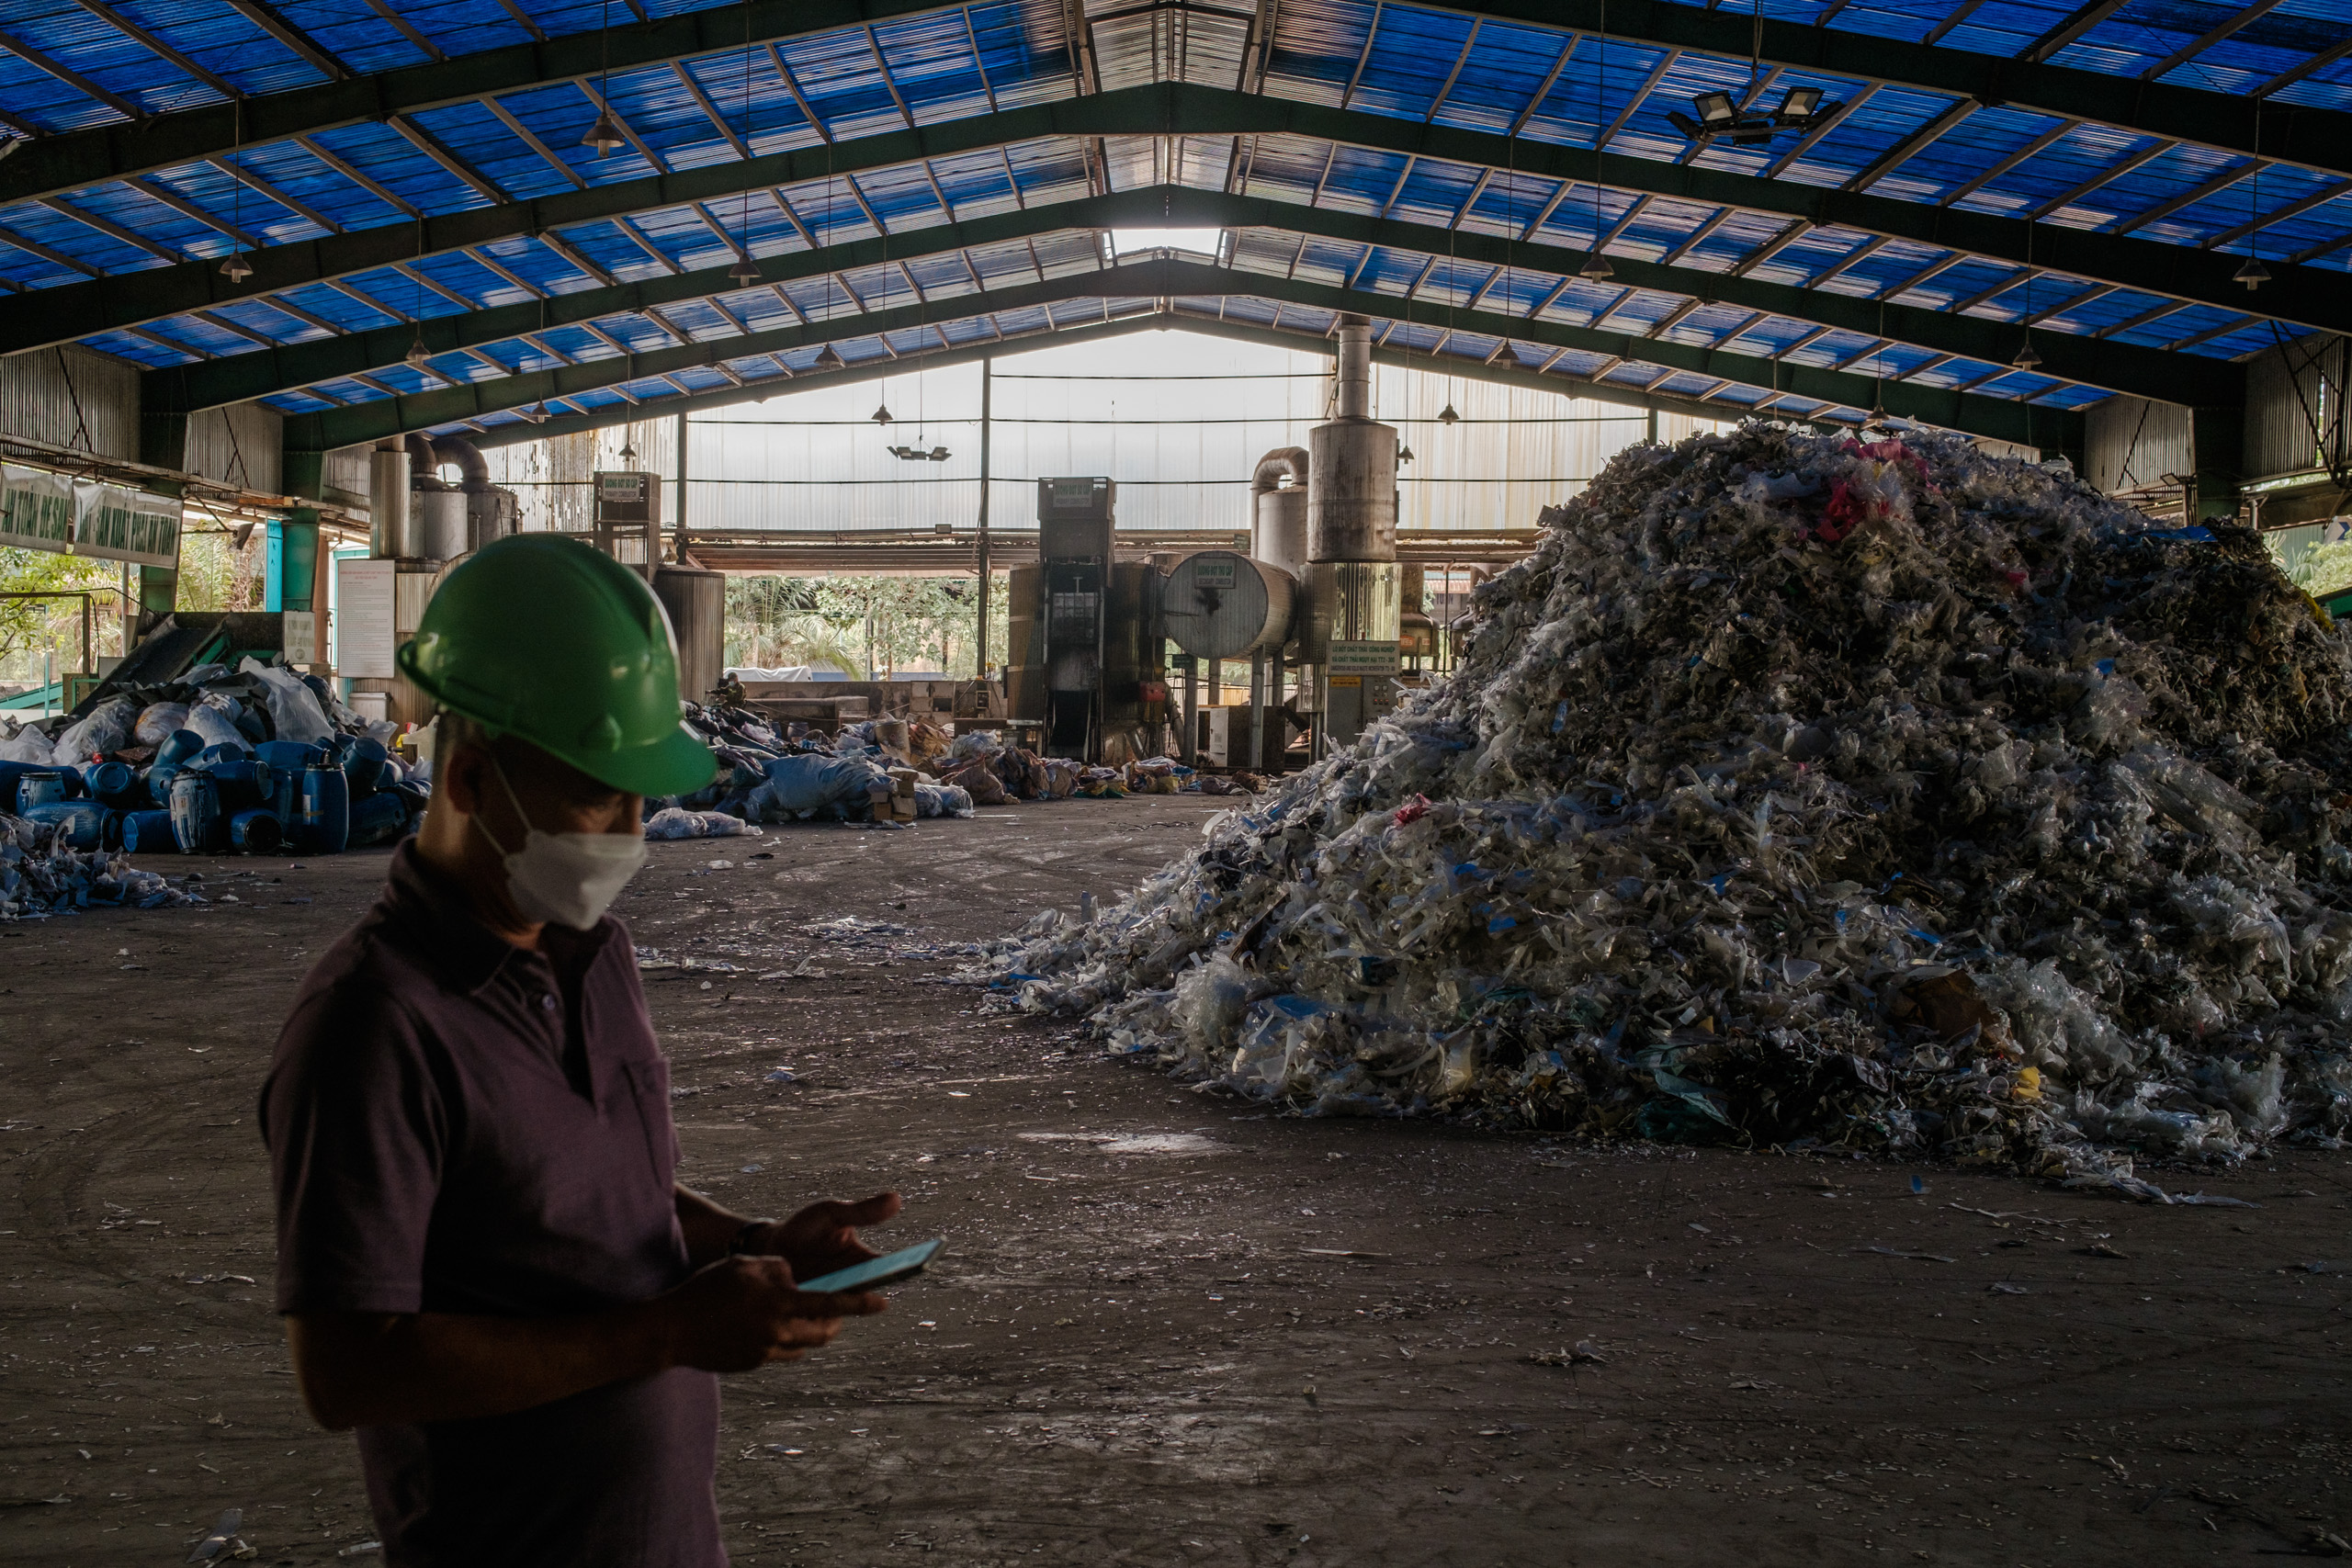 Low-value plastic waste is accumulating at Thanh Tung 2 before being turned into panels through ReForm Plastic's recycling method (Image: Jack Ross/China Dialogue)